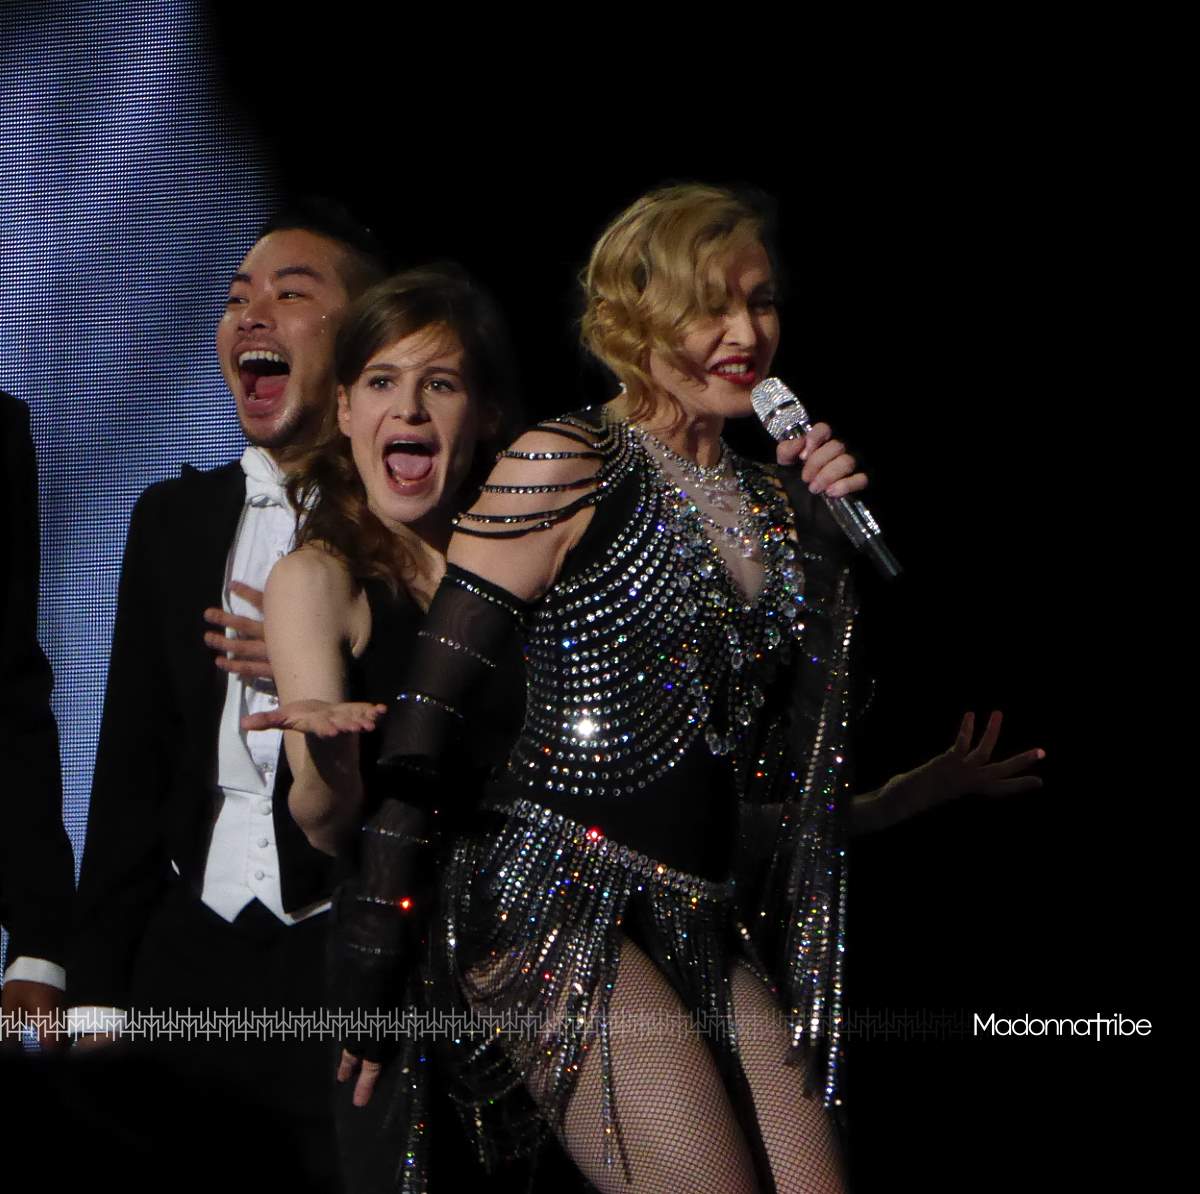 Christine & The Queens on stage with Madonna in Bercy